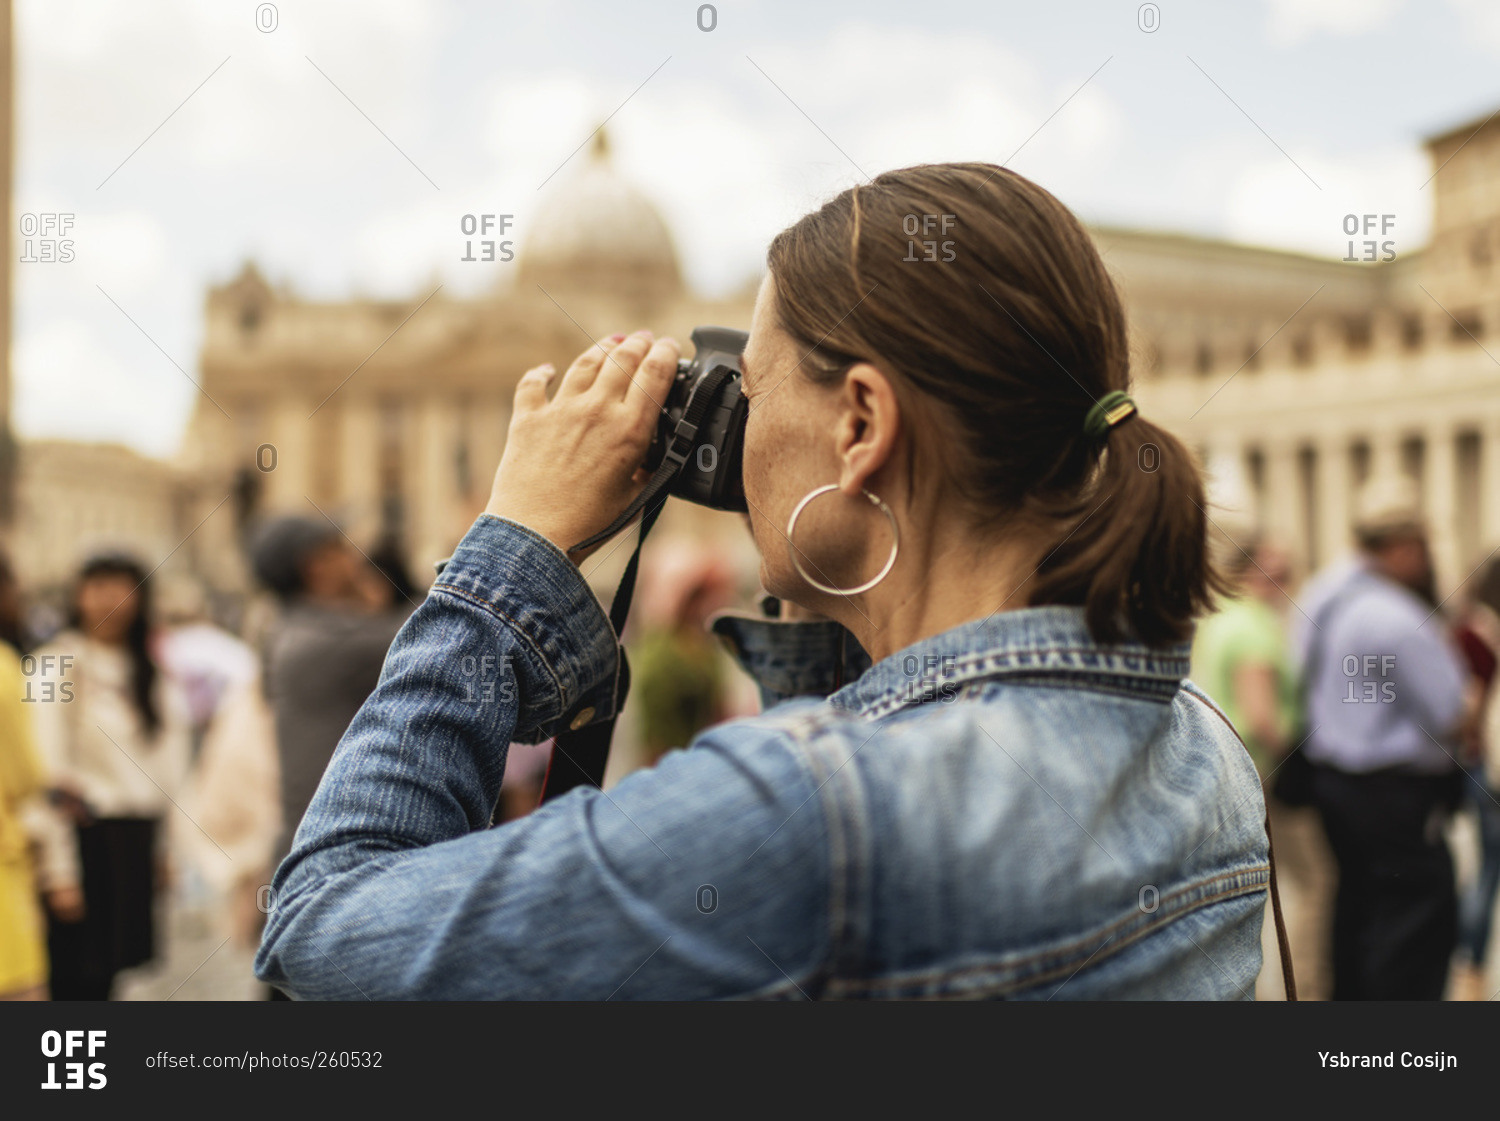 Female tourist photographing architecture in Rome, Italy